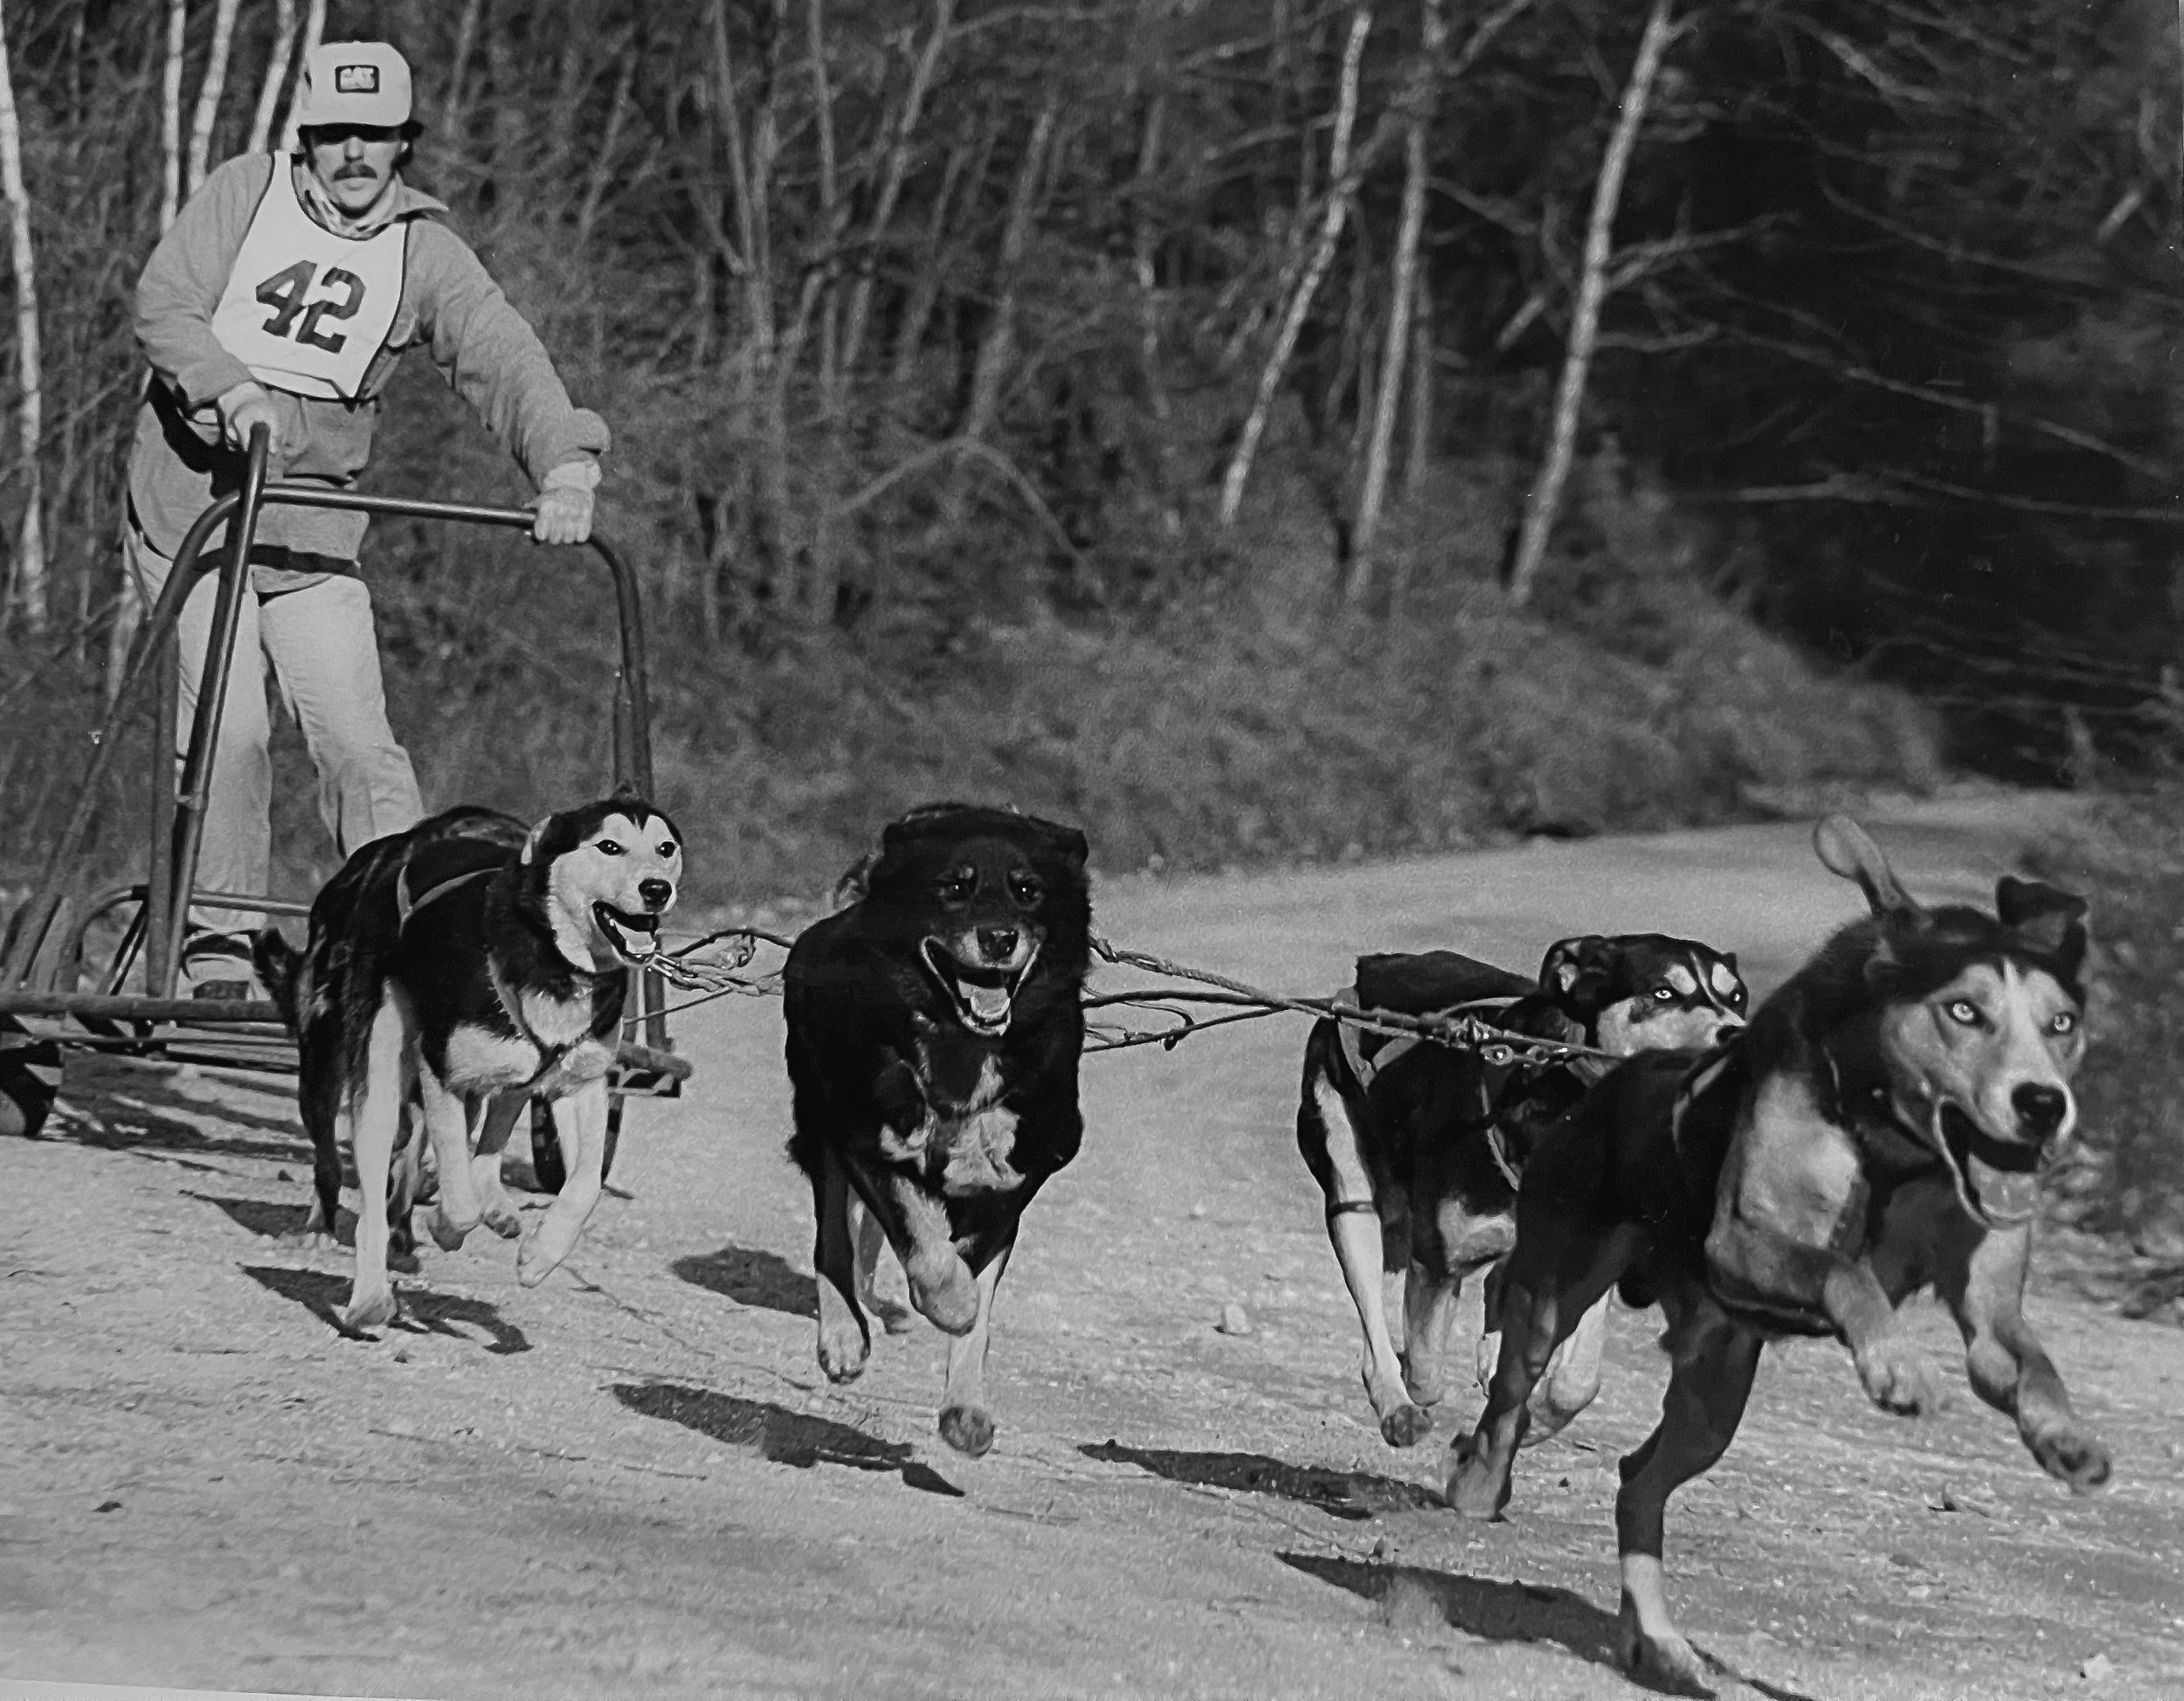    From 1971 until 1986 I raised and raced sled dogs all around the Northeastern US.  Here I am training a 6 dog team in a race with training rigs in Royalston MA in the early 1980’s.  